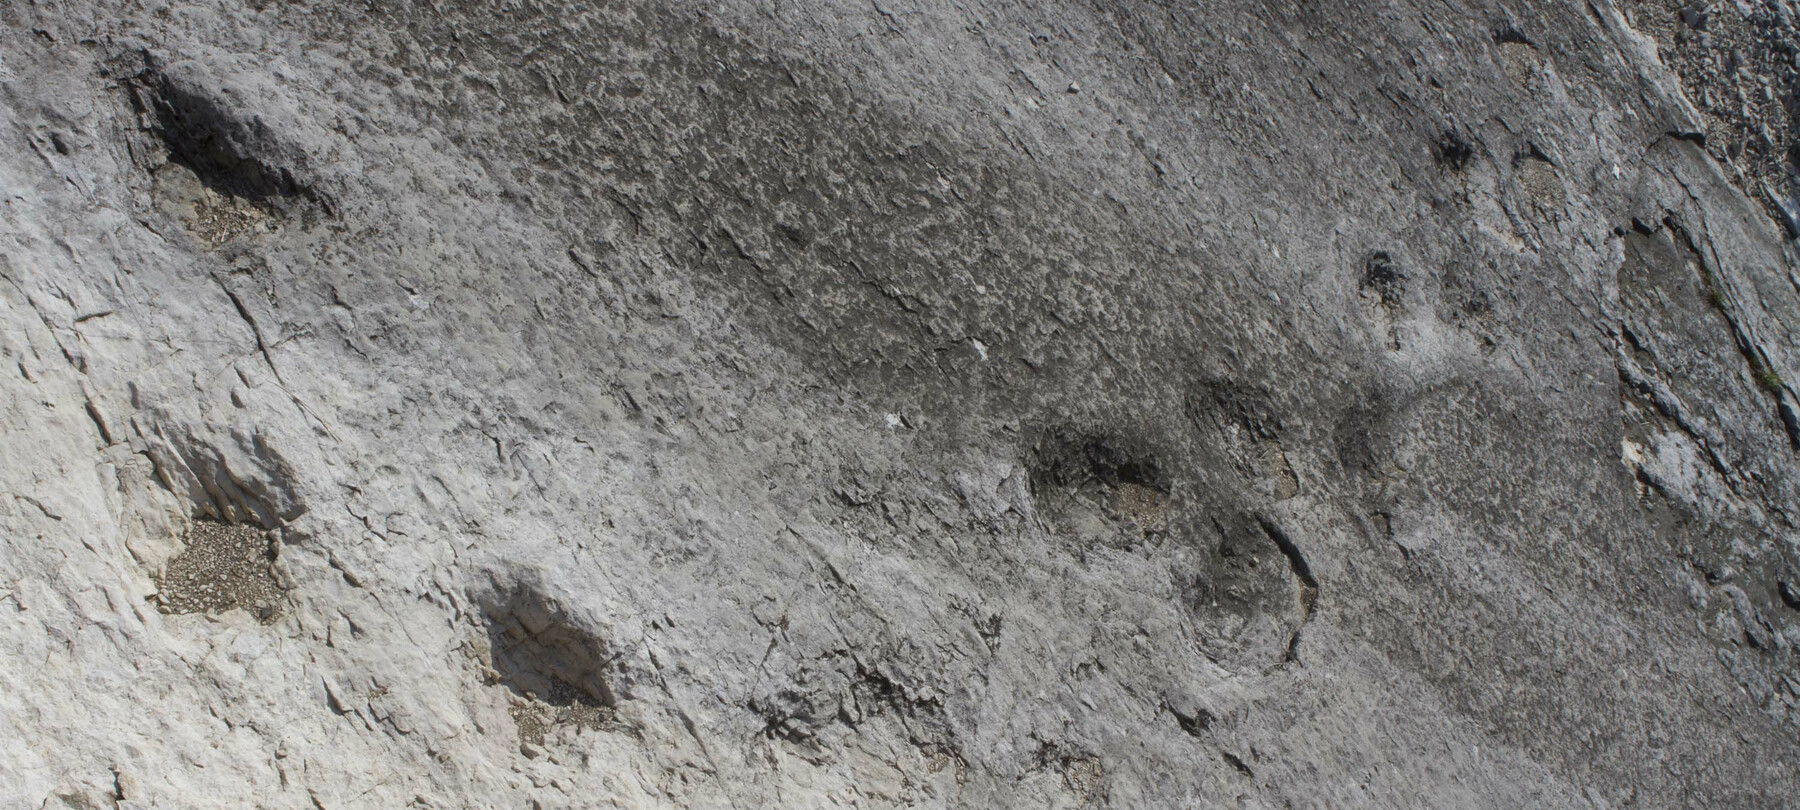 Dinosaur fossils in the Dolomites 